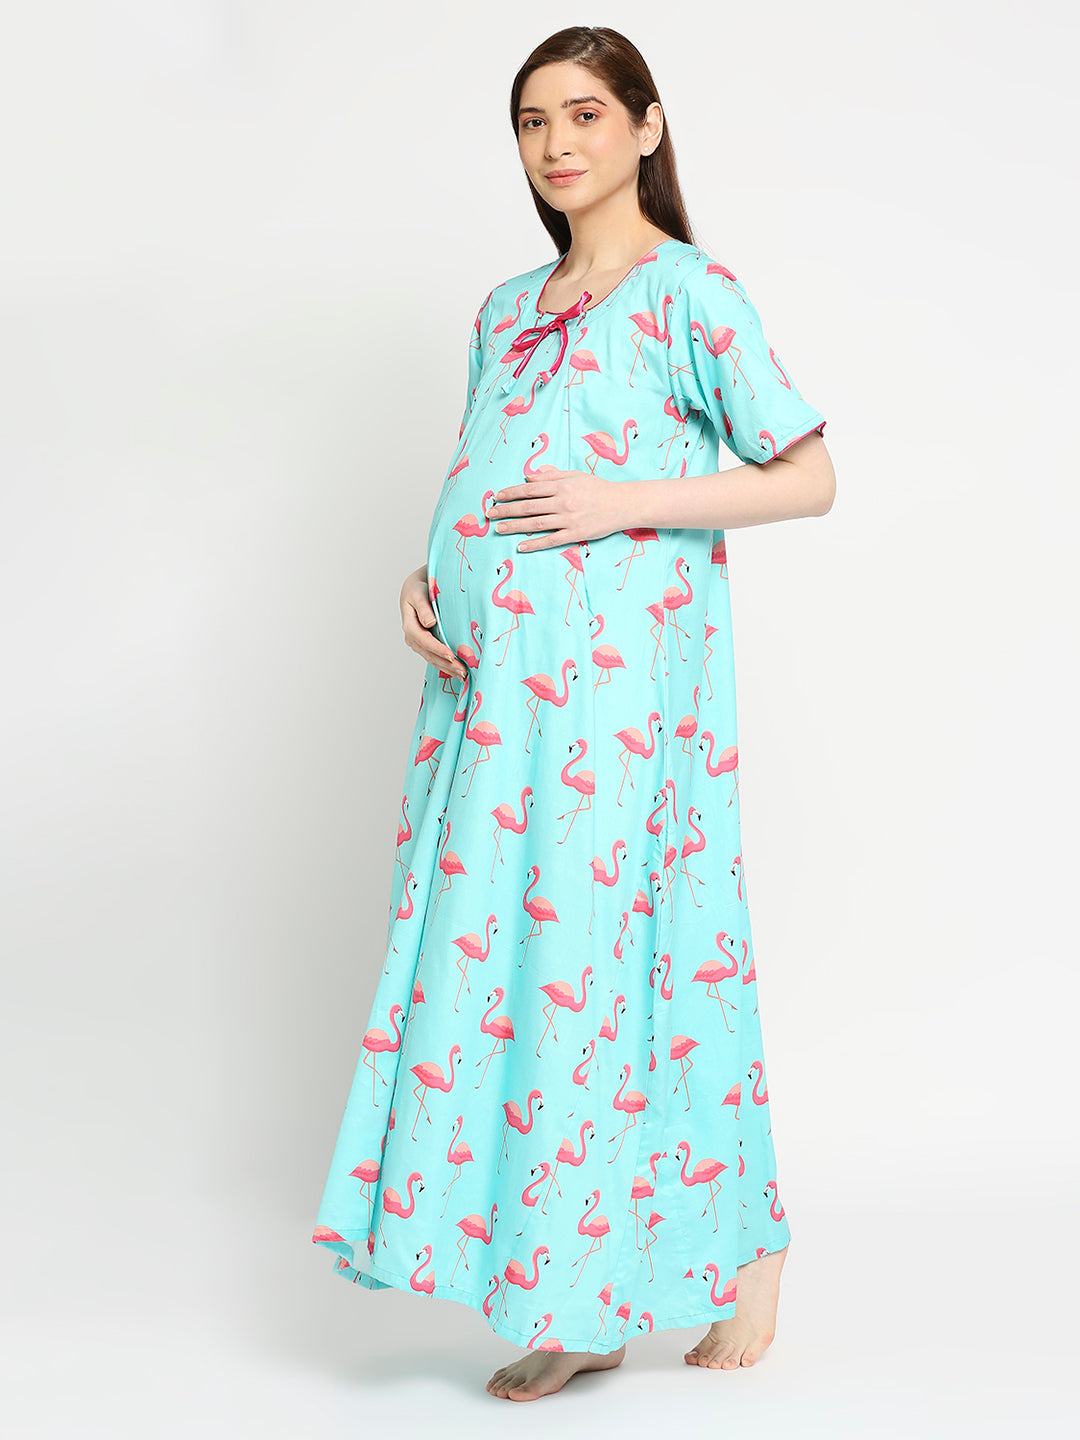 Pink Flamingo  Maternity Gown - Pure Cotton Round Neck Gown with 2 Invisible Zips for Feeding